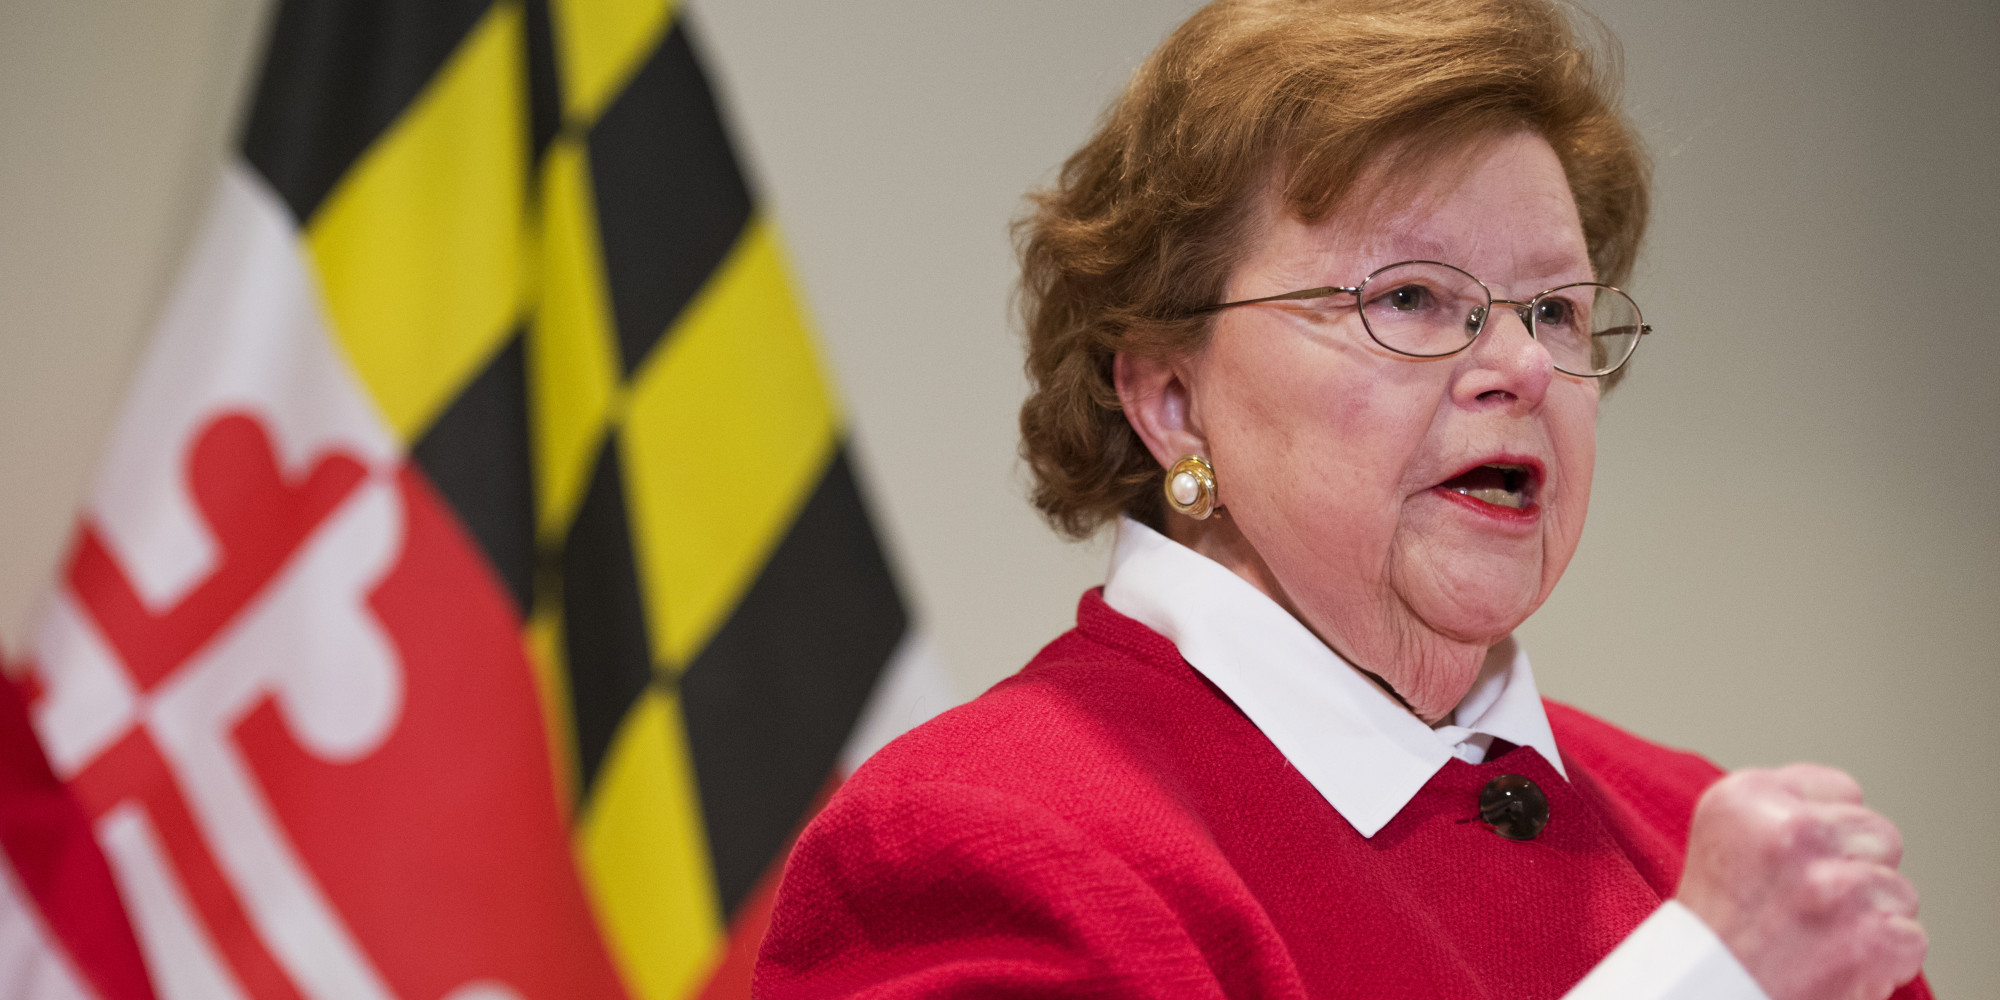 UNITED STATES - MARCH 2: Sen. Barbara Mikulski, D-Md., announces that she will not seek another term during a news conference at the Inn at Henderson's Wharf in Baltimore, Md., March 2, 2015. (Photo By Tom Williams/CQ Roll Call)